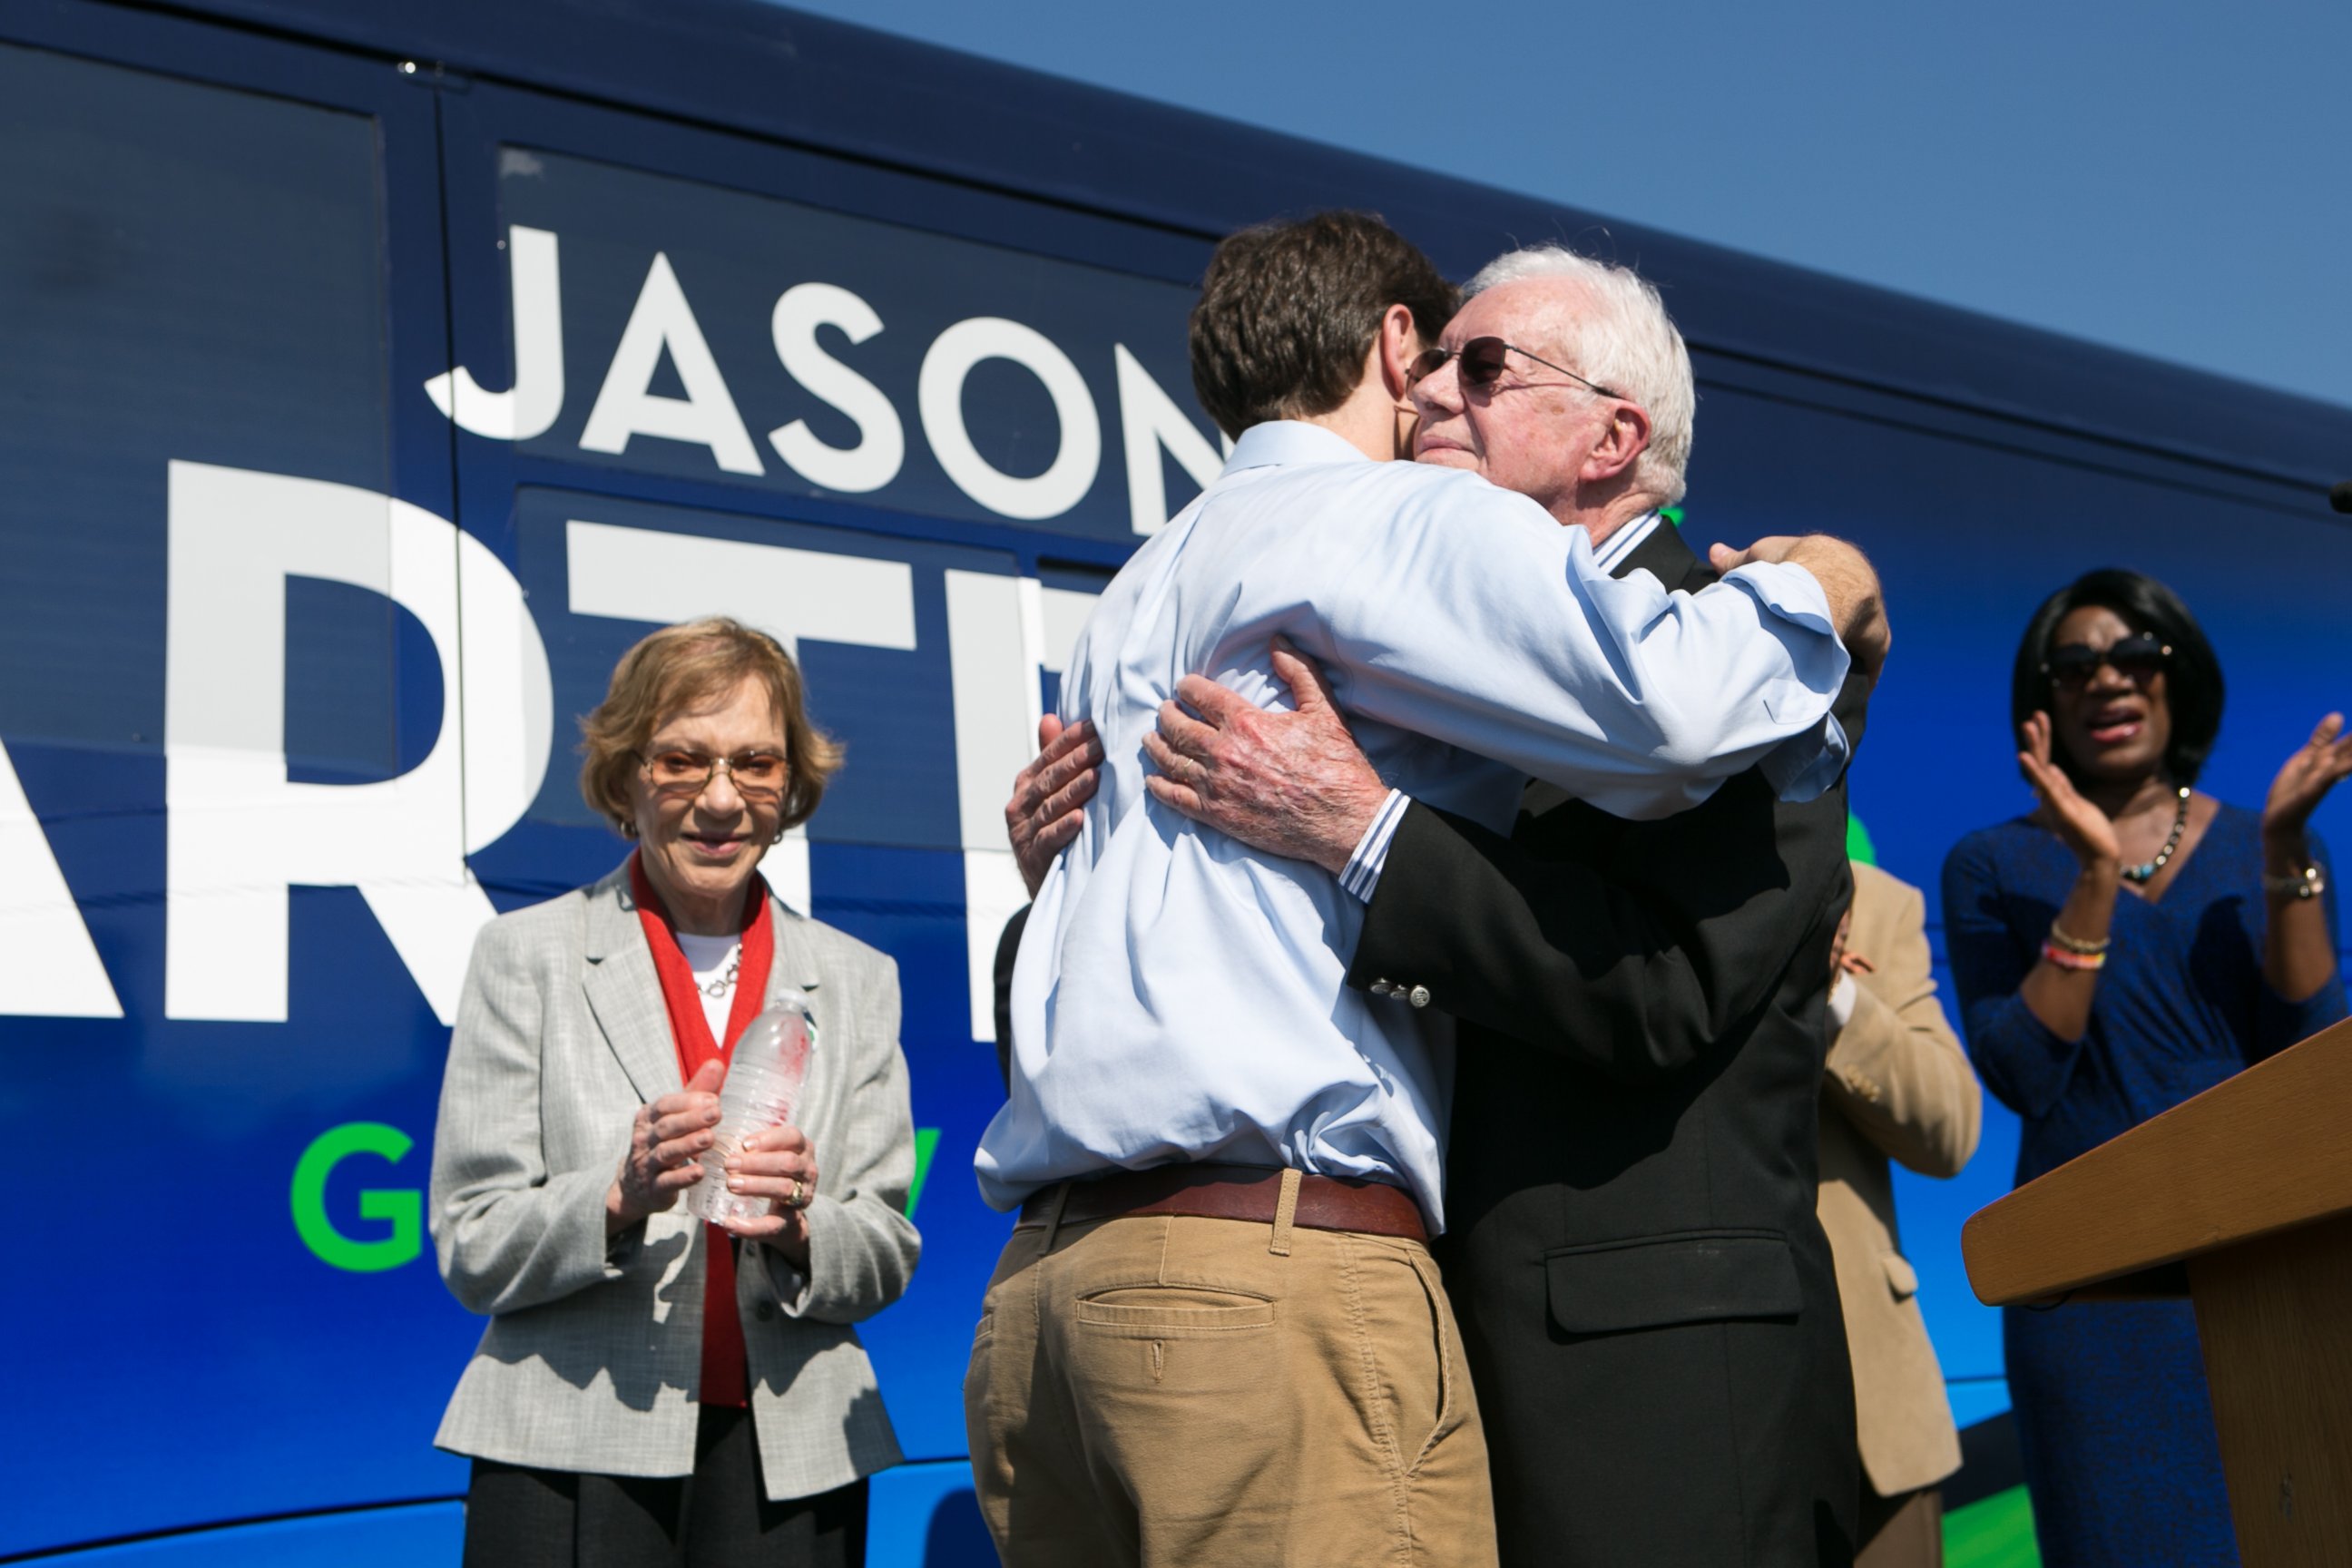 PHOTO: Jason Carter hugs his grandfather, former U.S. President Jimmy Carter, as former first lady Rosalynn Carter, left, looks on in Columbus, Ga. on Oct. 27, 2014.